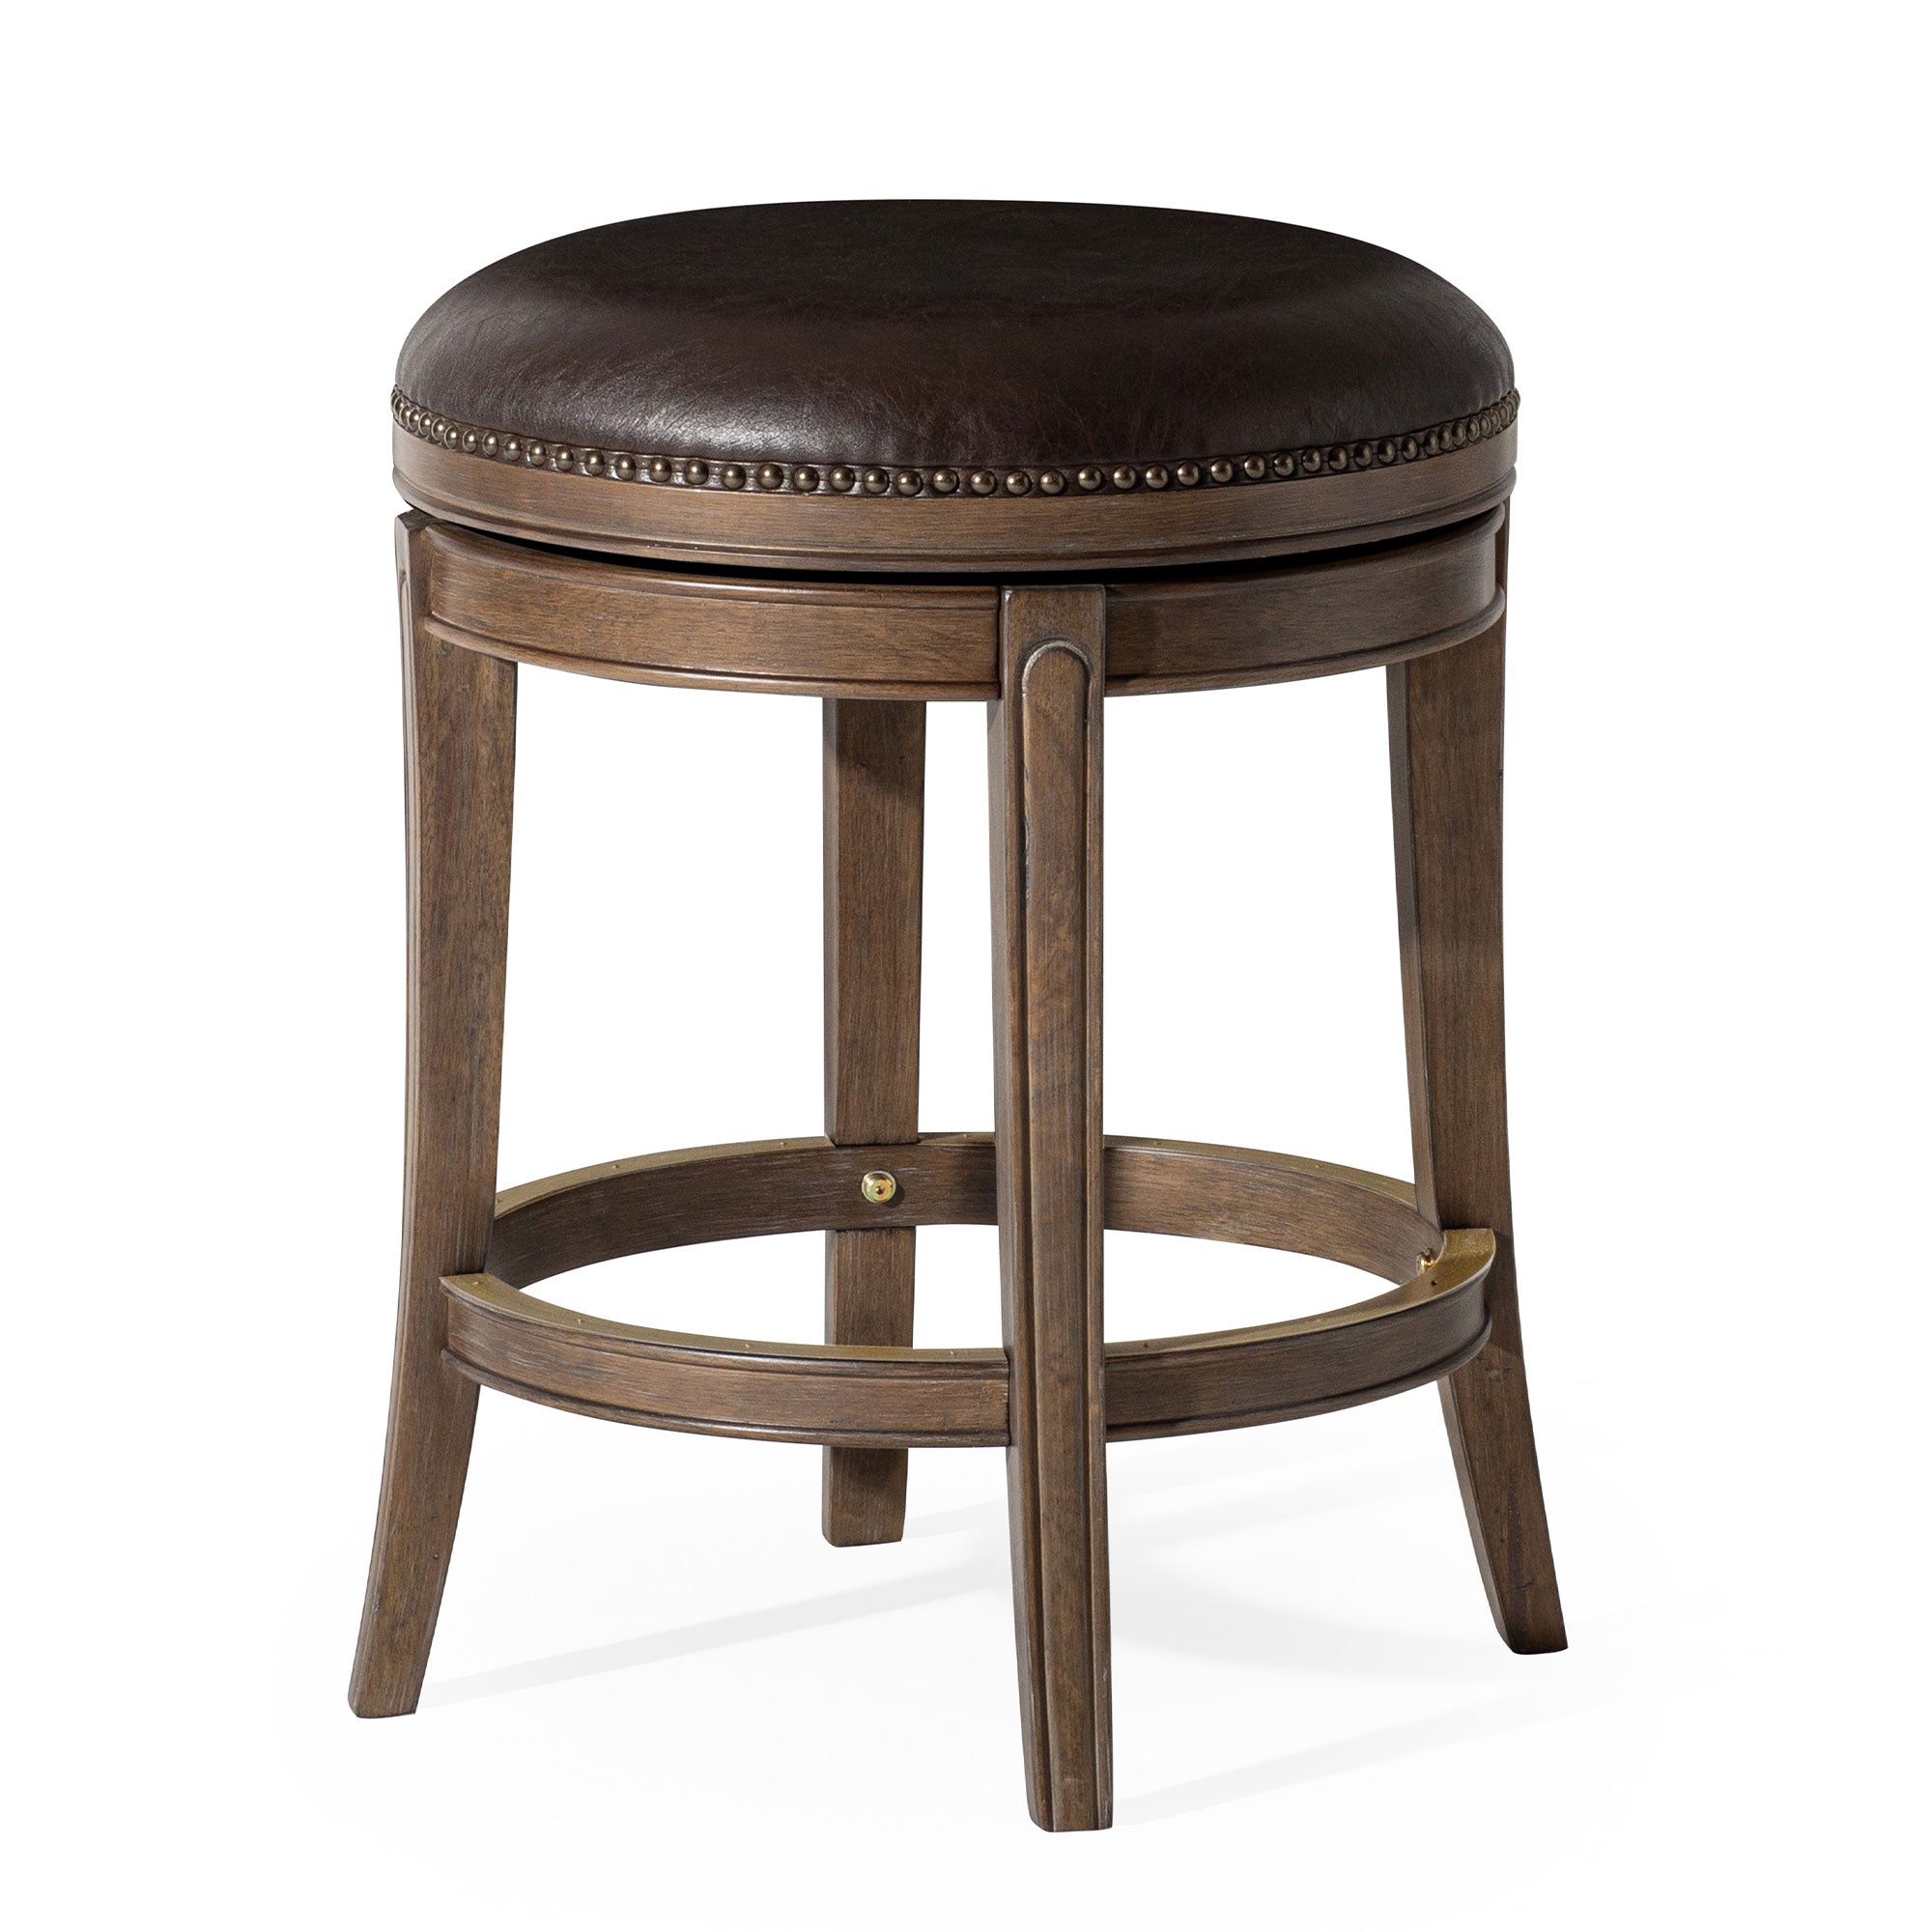 Alexander Backless Counter Stool in Walnut Finish with Marksman Saddle Vegan Leather in Stools by Maven Lane